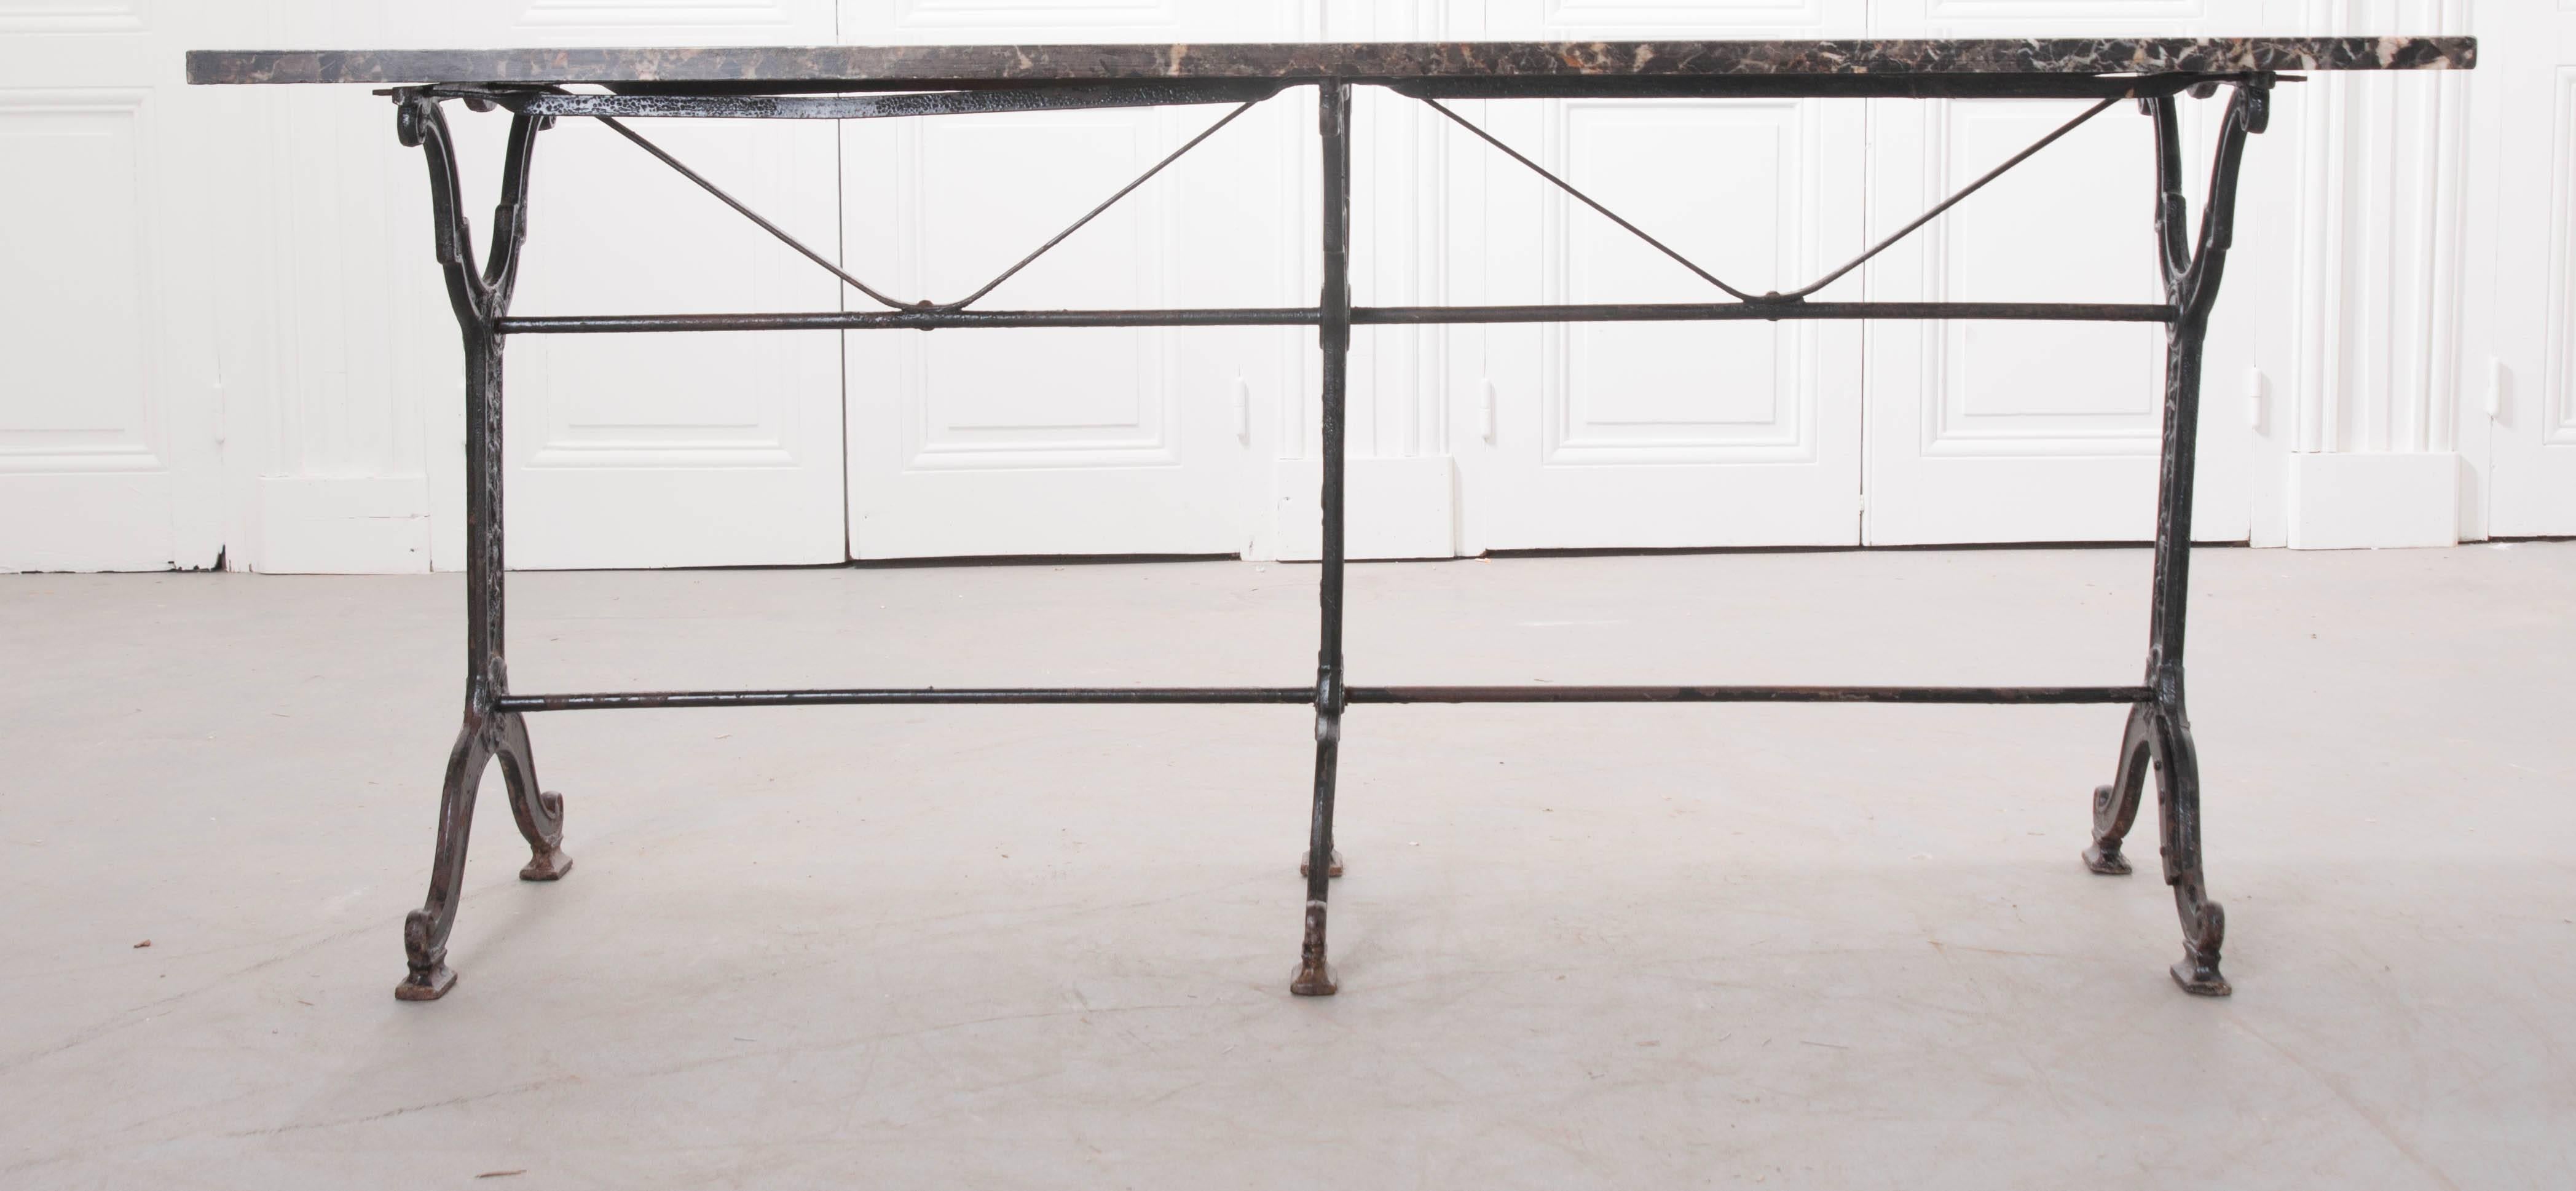 This fantastic marble-top bistro table was crafted in France, at the beginning of the 20th century. The table is unusually long, making it an ideal sofa table or hallway console. The marble top is stunning, and in remarkable condition. The cast iron